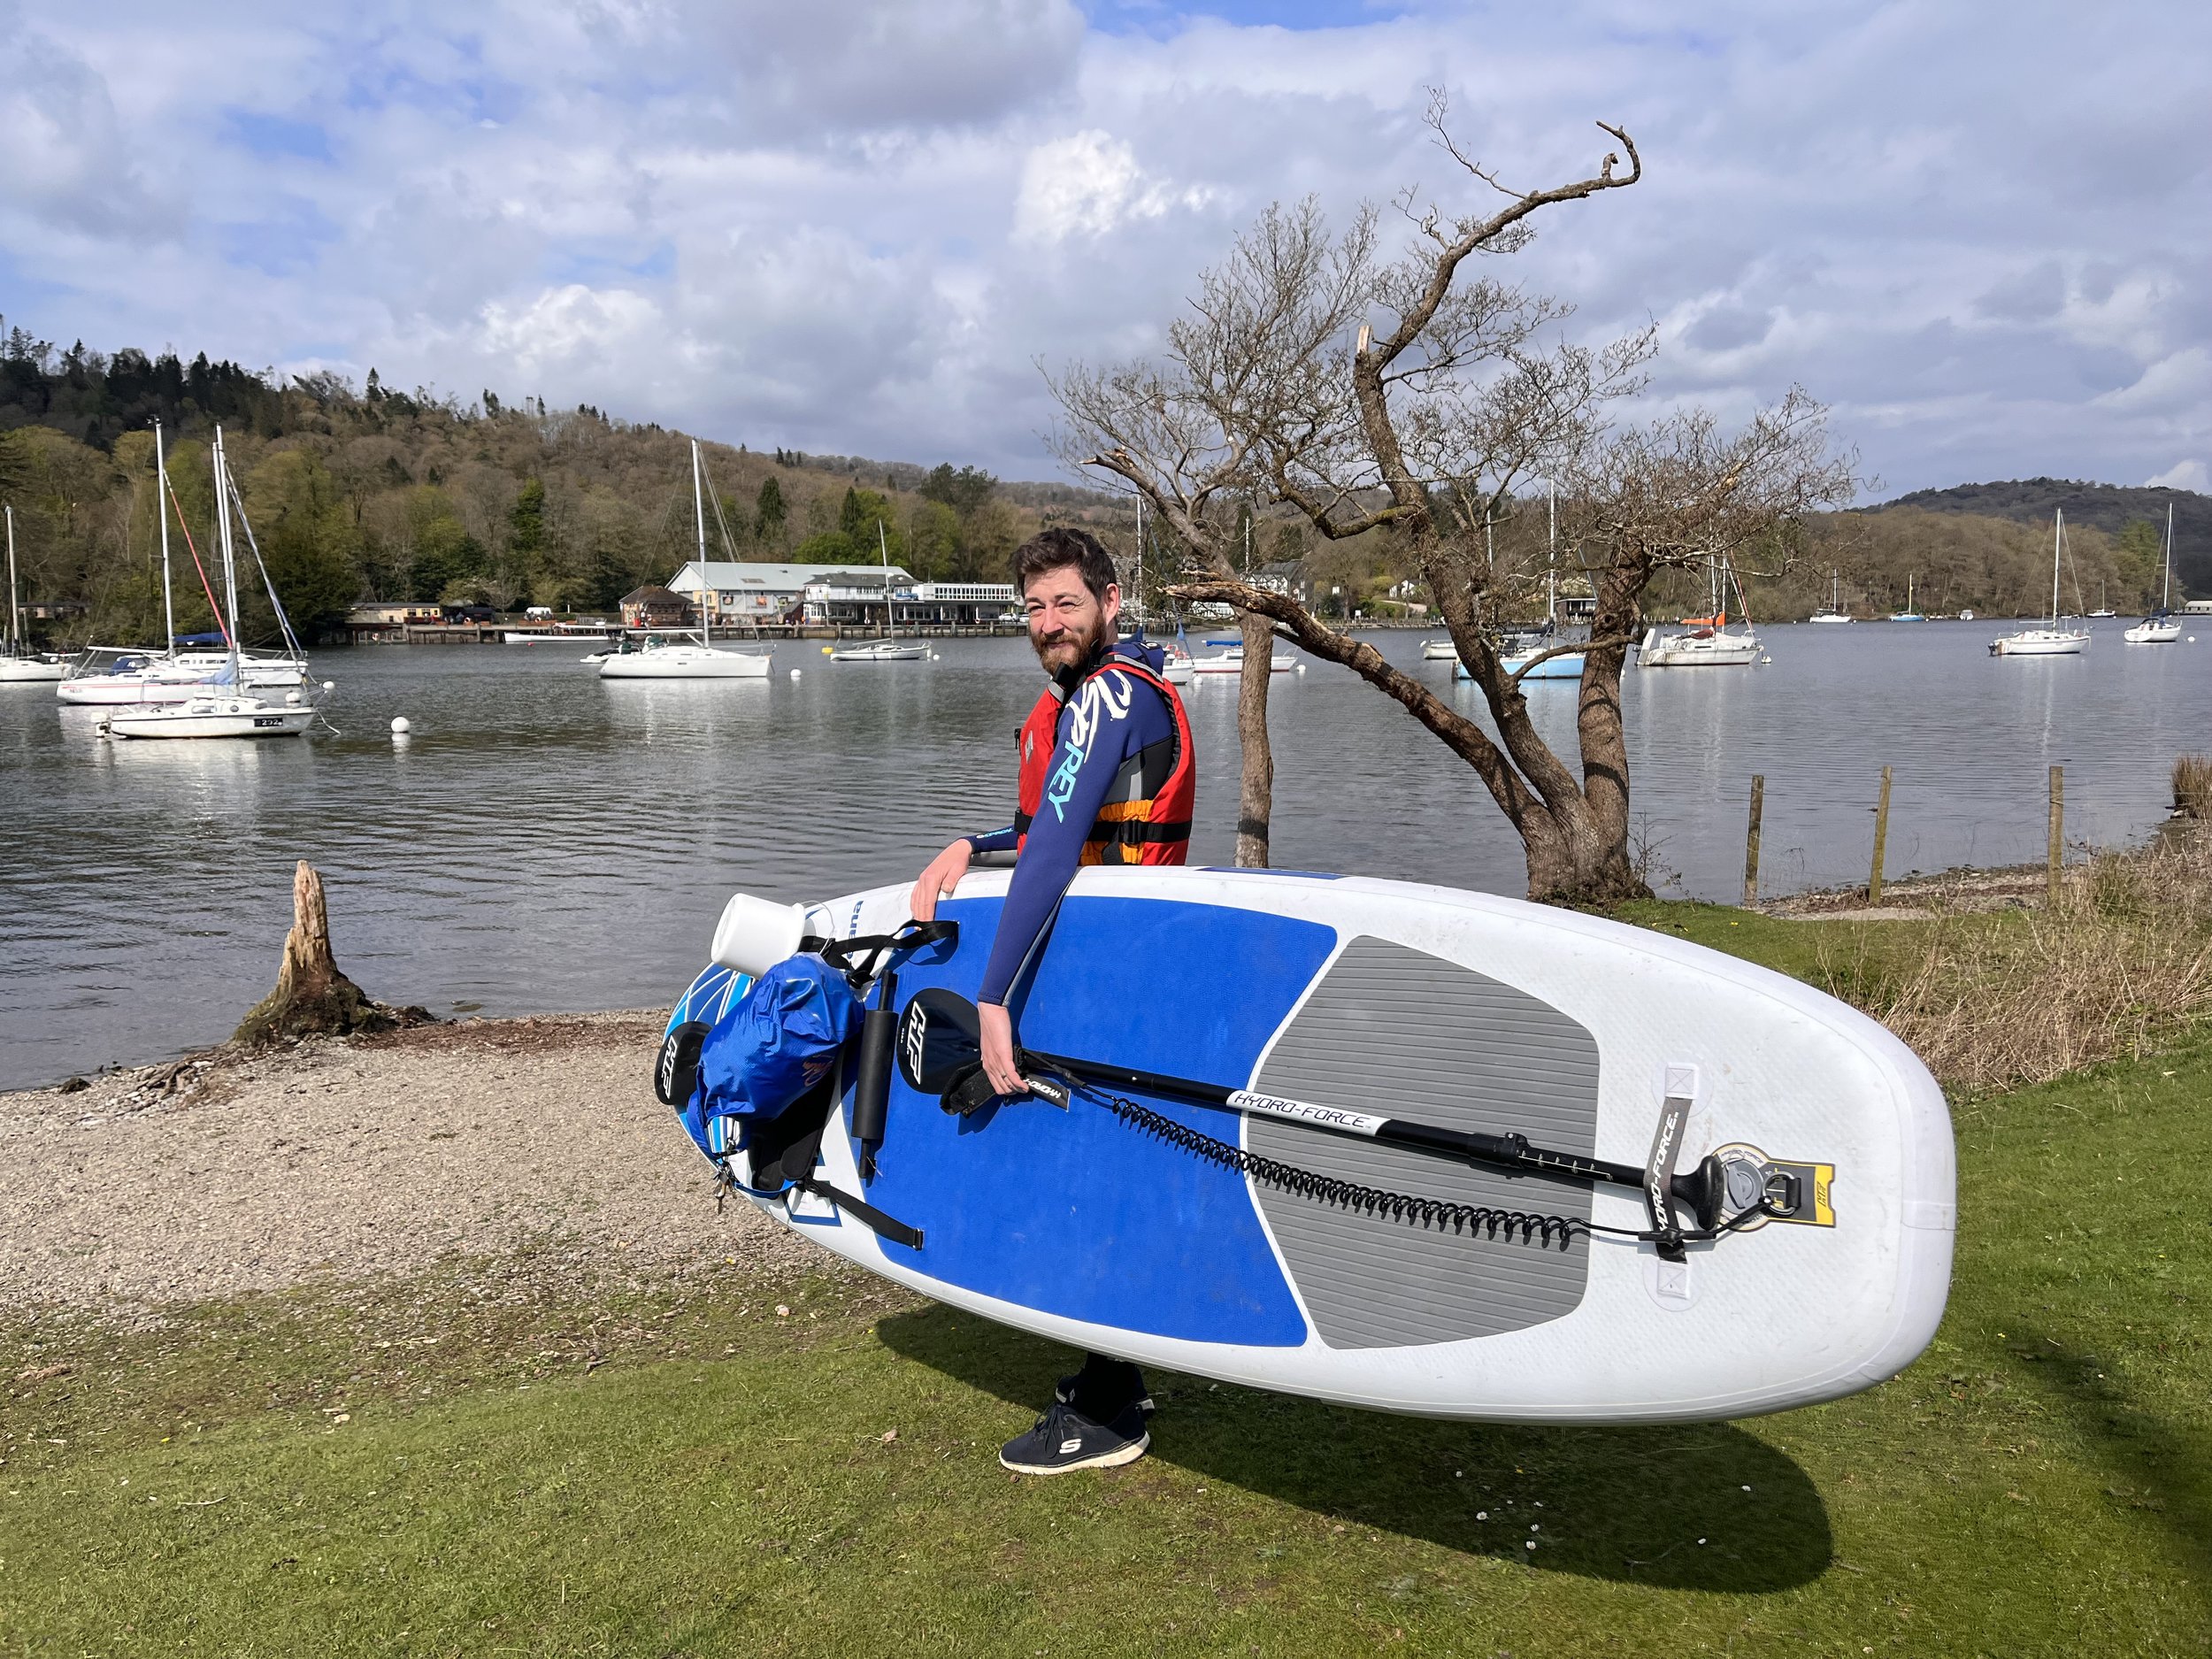 Citizen scientist Paddy about to take lake samples while on his paddle board.jpg